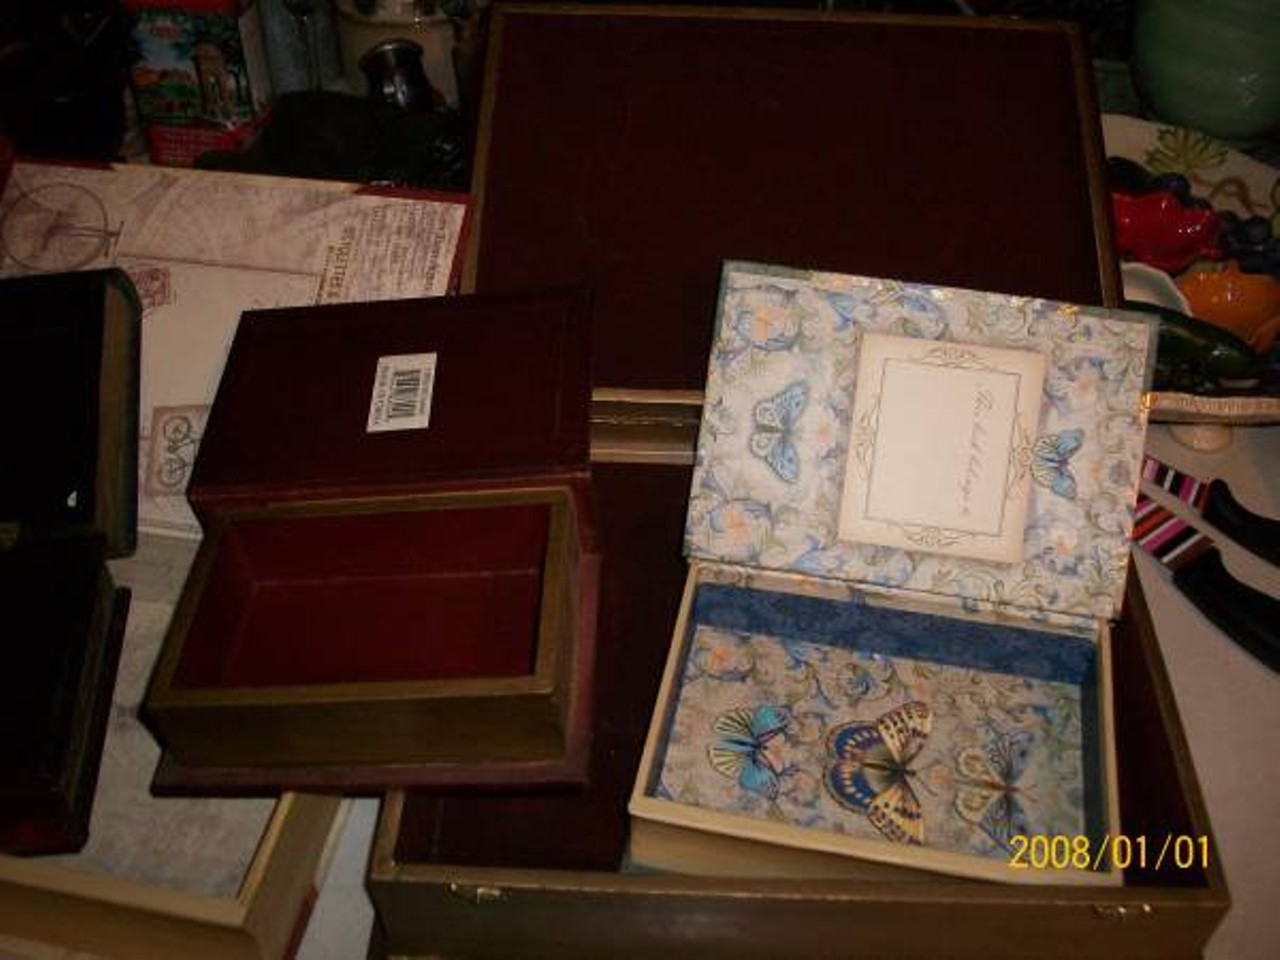 Hidden Compartment Books
We aren&#146;t sure if we should be condoning hiding stuff in fake books, but these could come in handy one day. Nine books for $60.